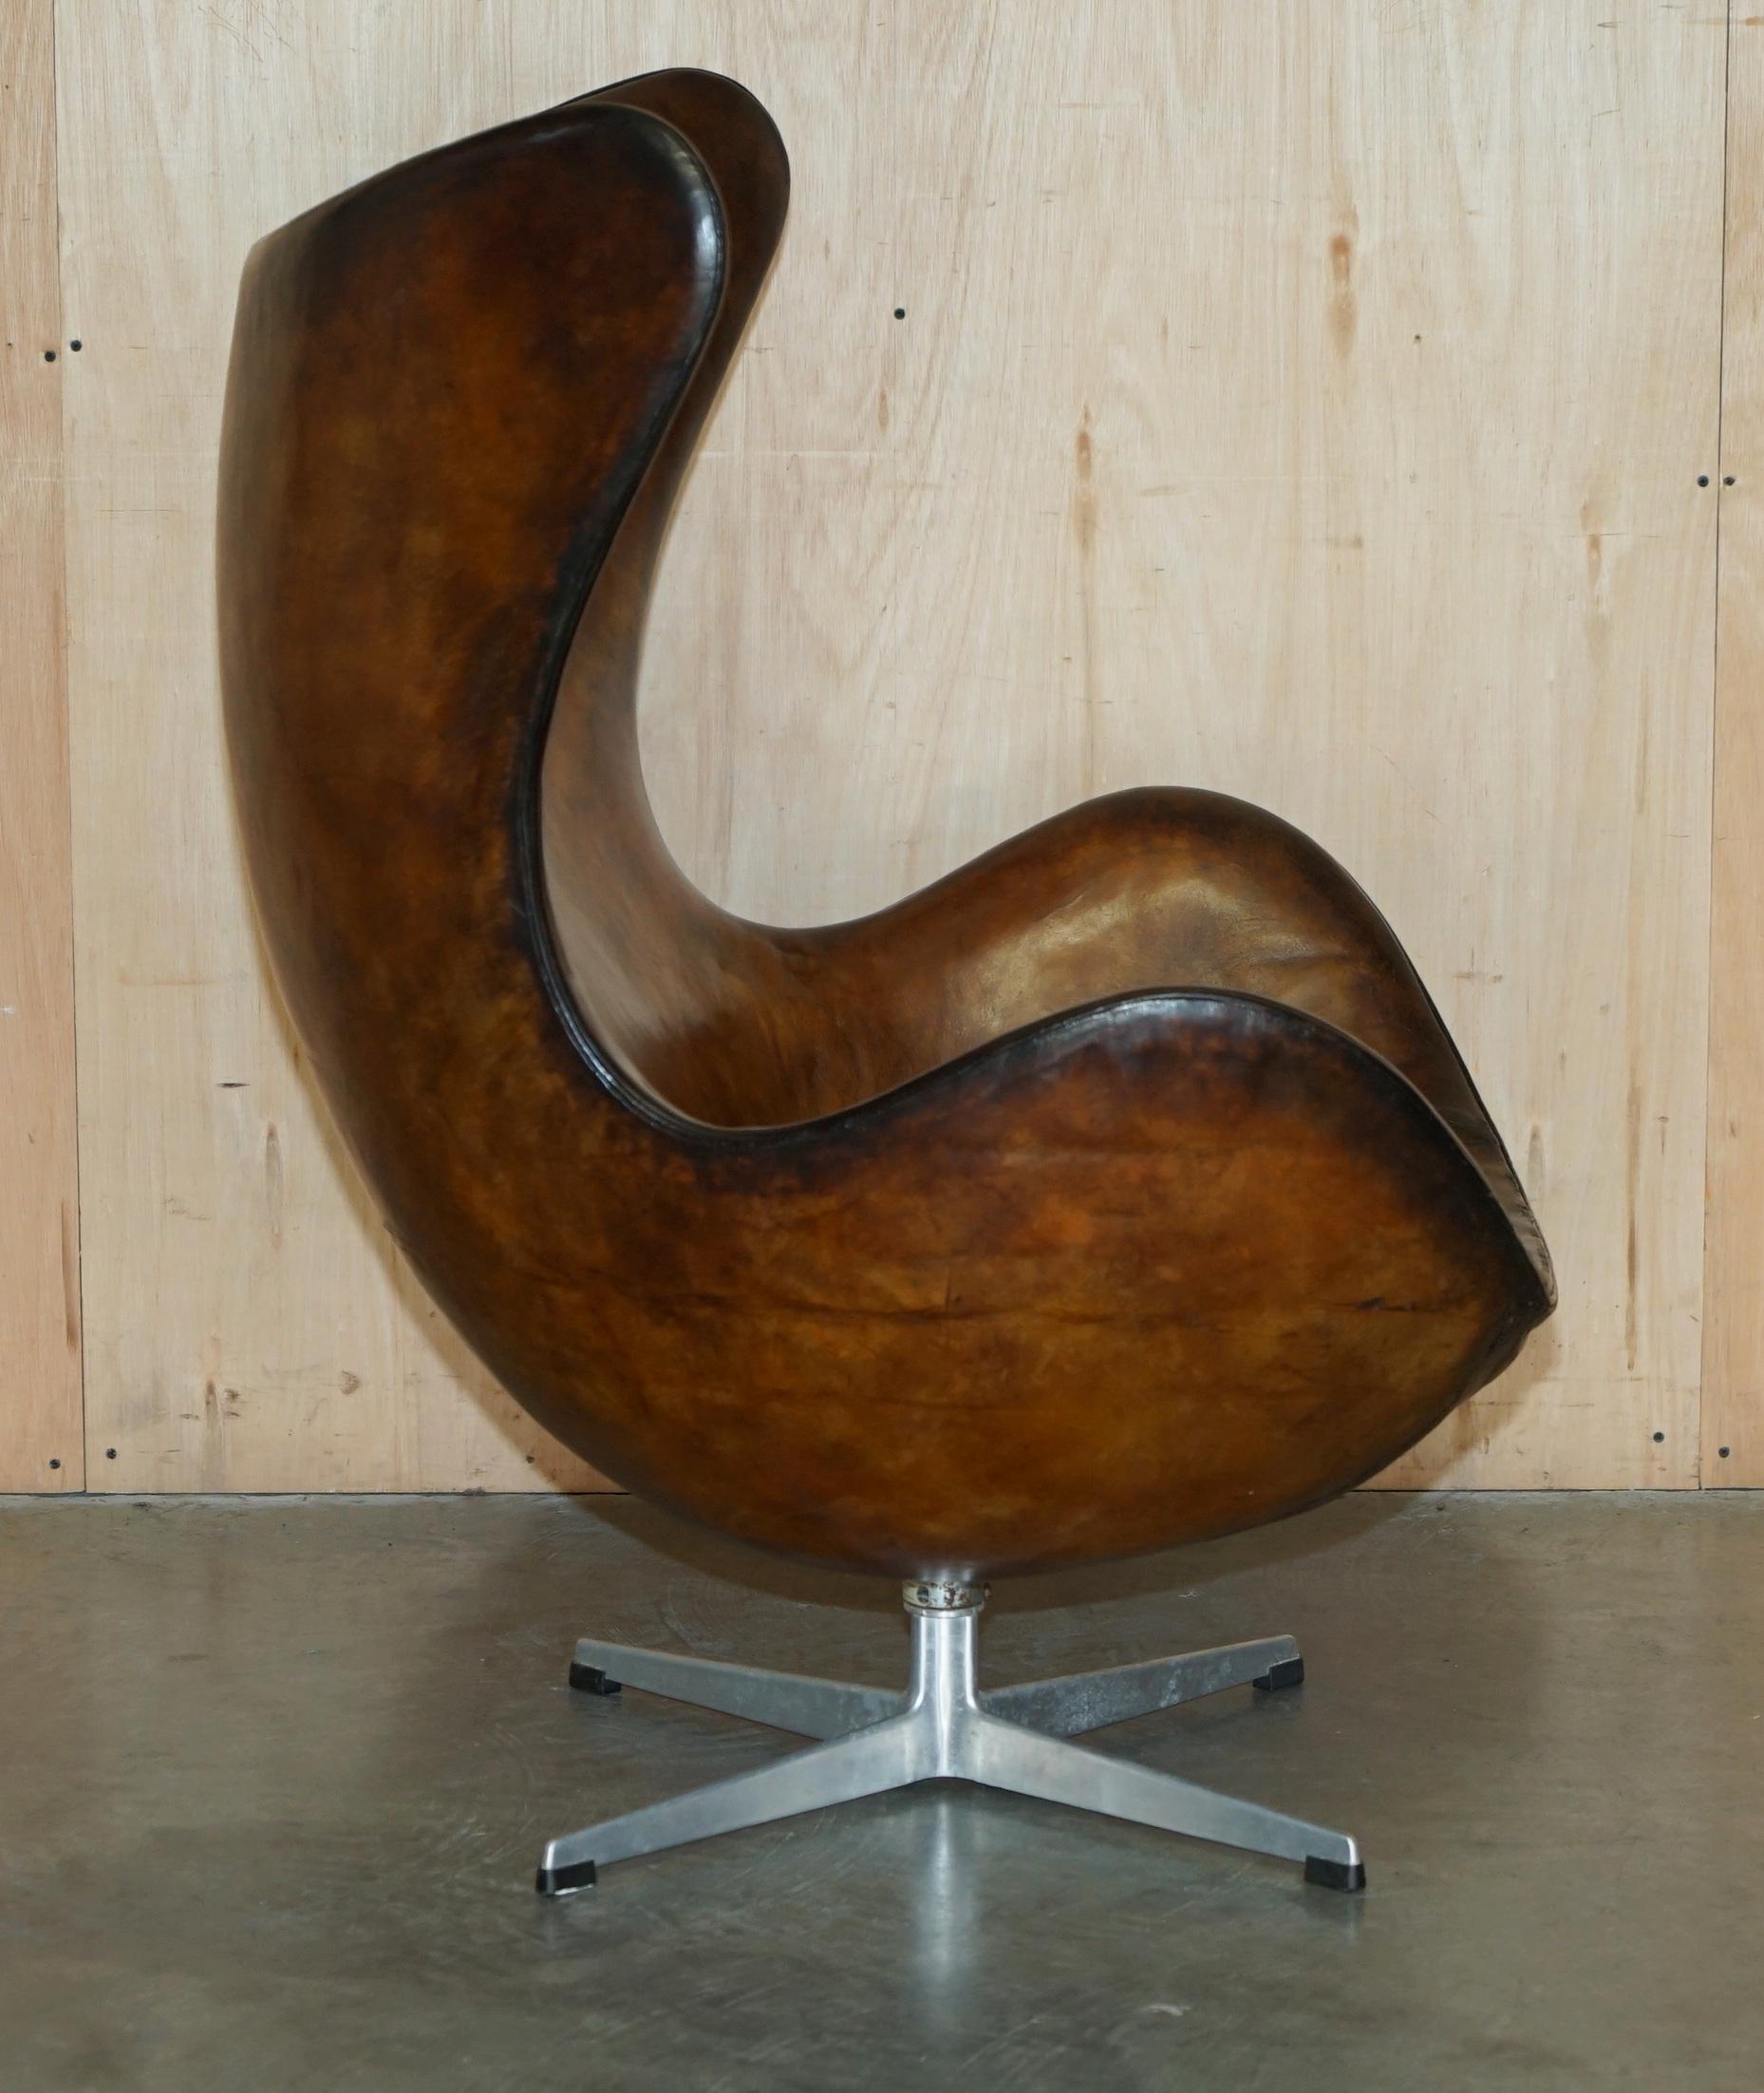 ORIGINAL FULLY RESTORED 1965 FRITZ HANSEN EGG CHAiR & FOOTSTOOL IN BROWN LEATHER For Sale 1